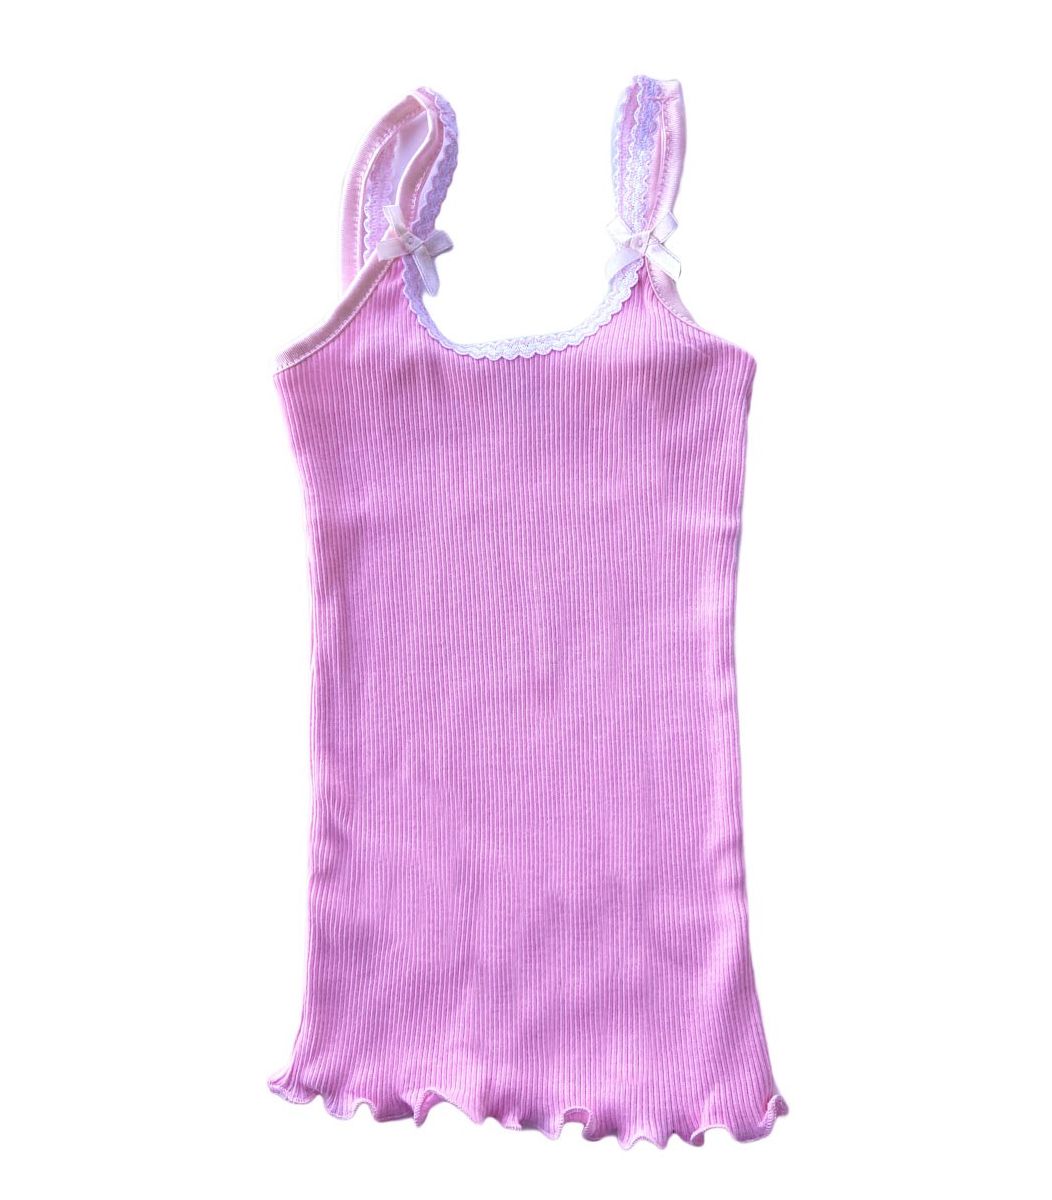  Lord Offers CAMISOLE- 1